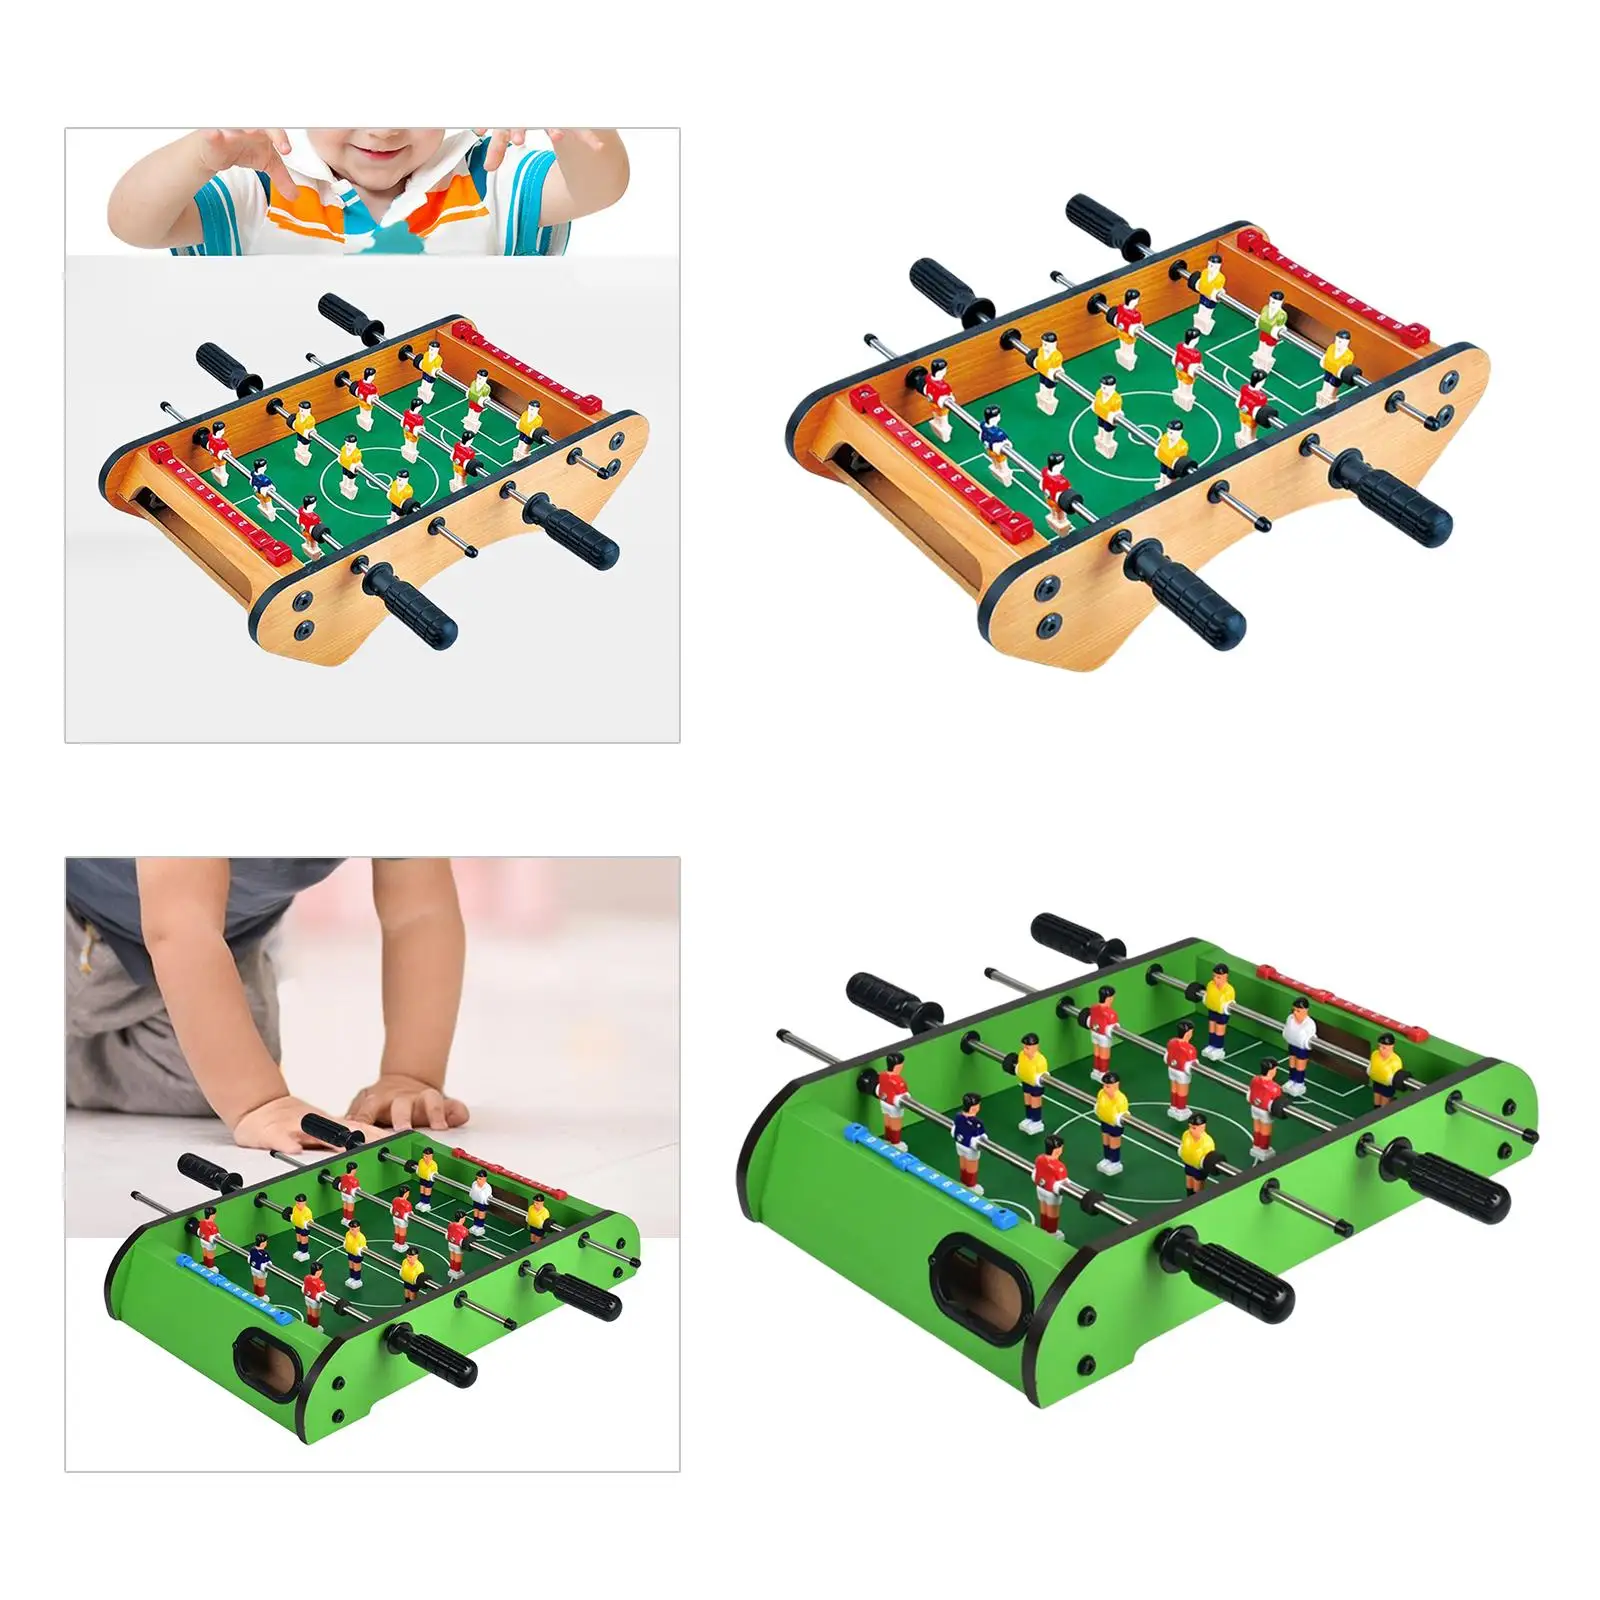 Wooden Soccer Table Football Board Game DIY Portable for Family Sports